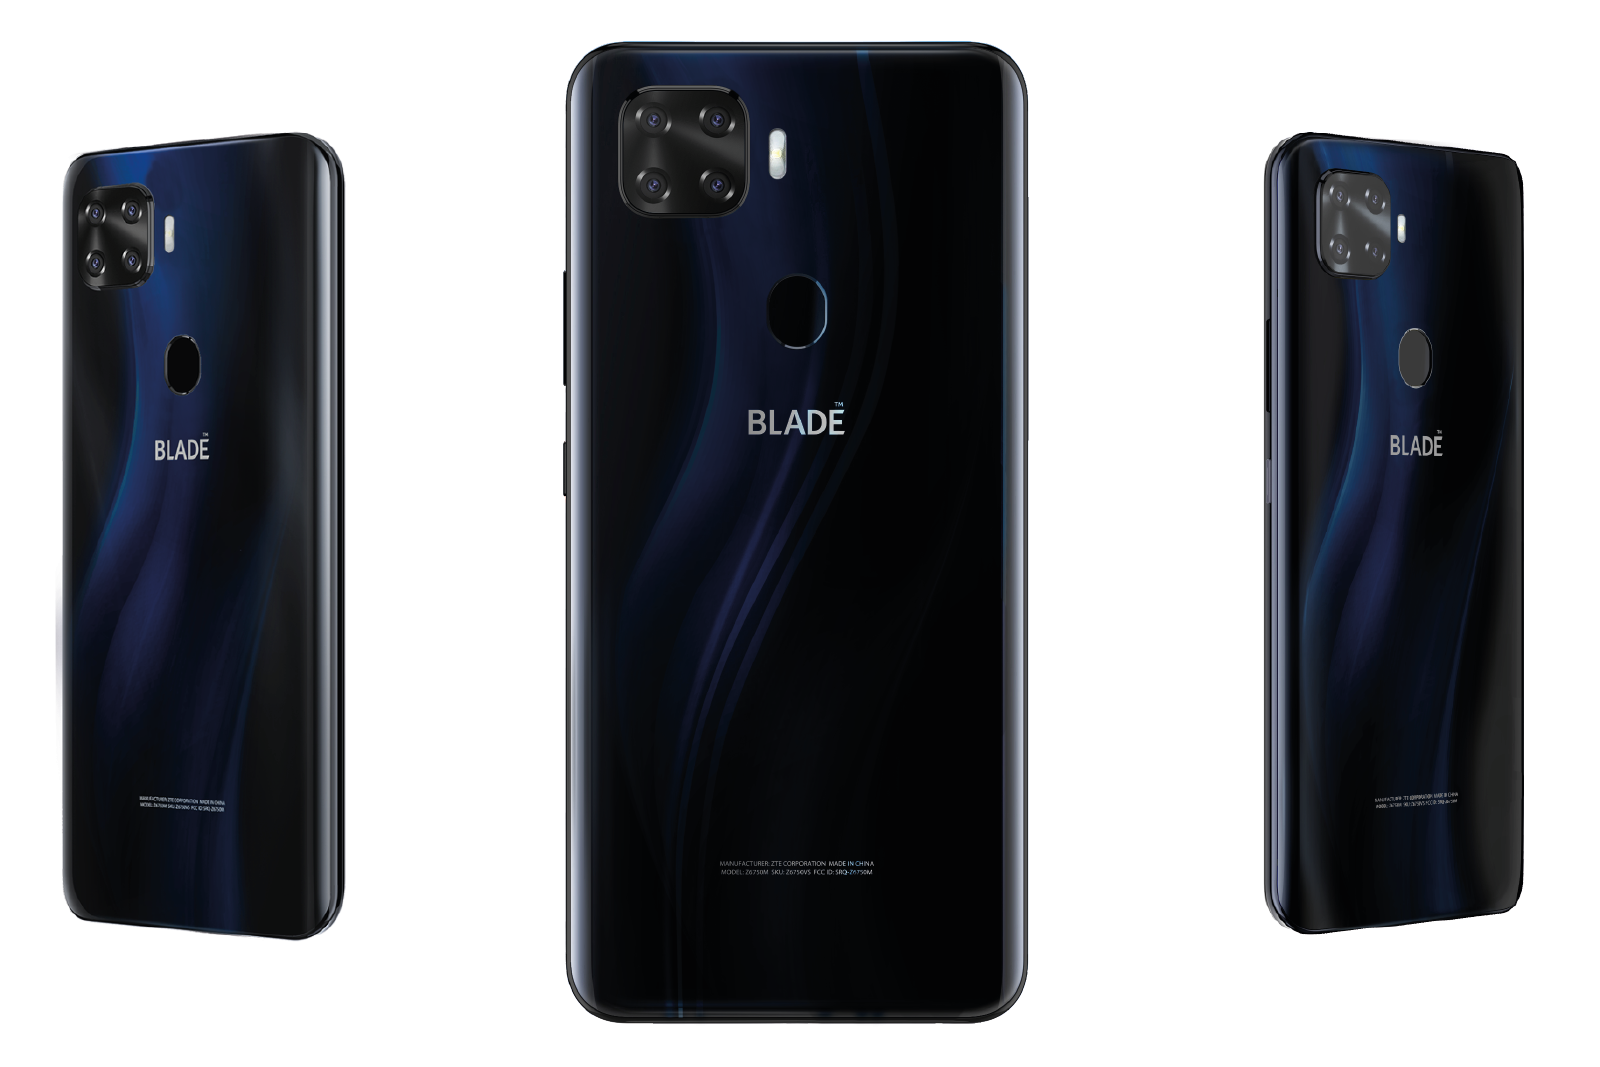 Blade X1 5G launches at Visible to make 5G affordable